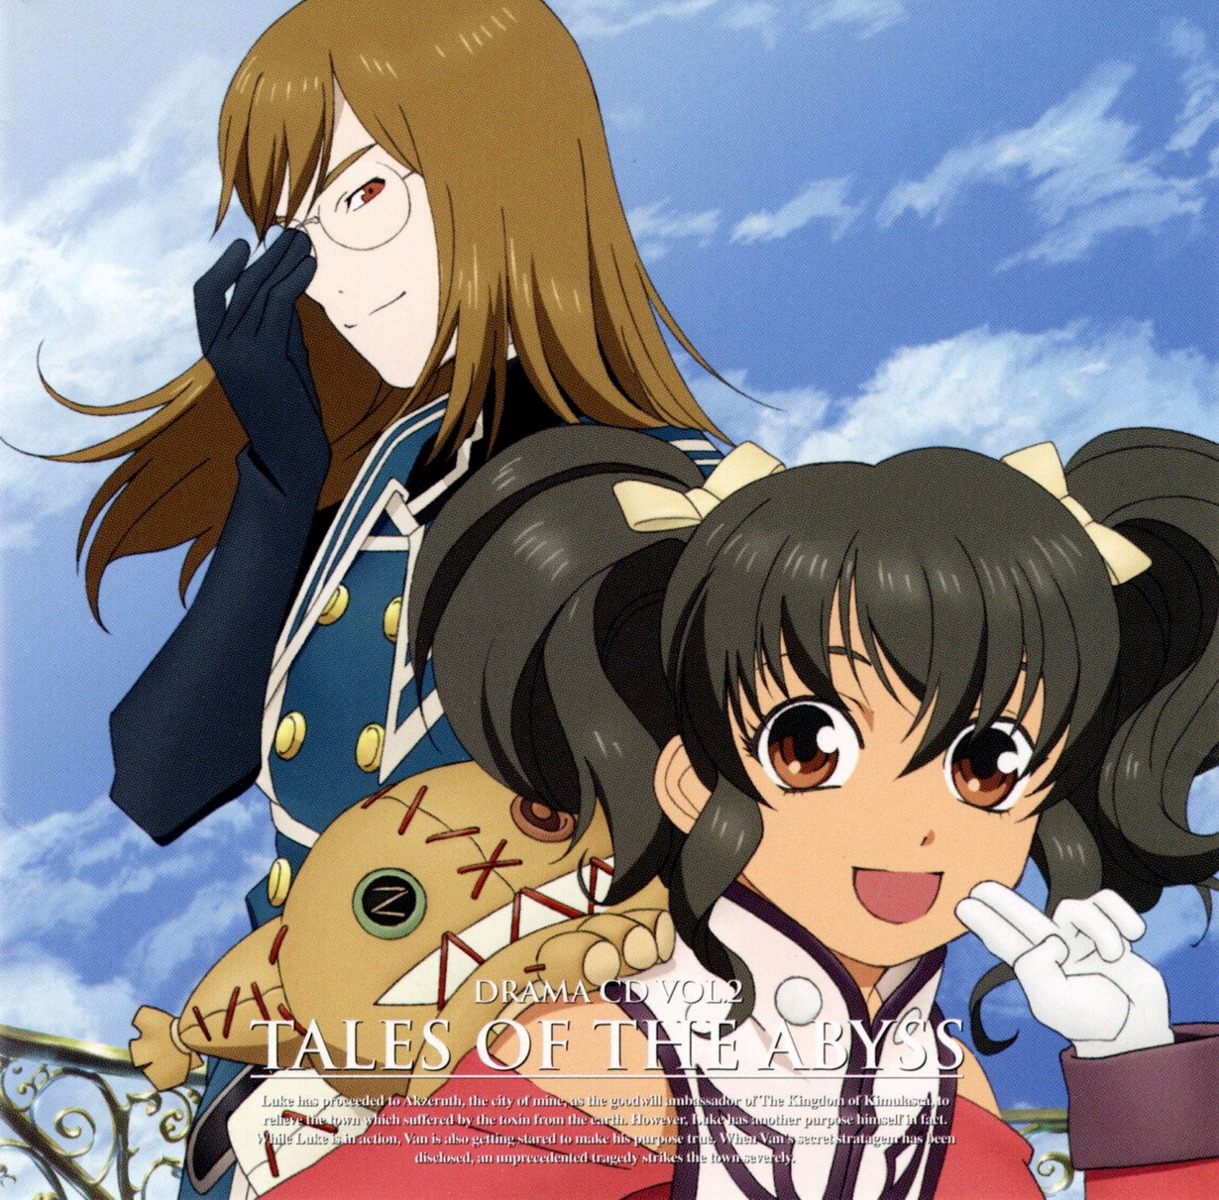 anise_tatlin jade_curtis screening tales_of tales_of_the_abyss